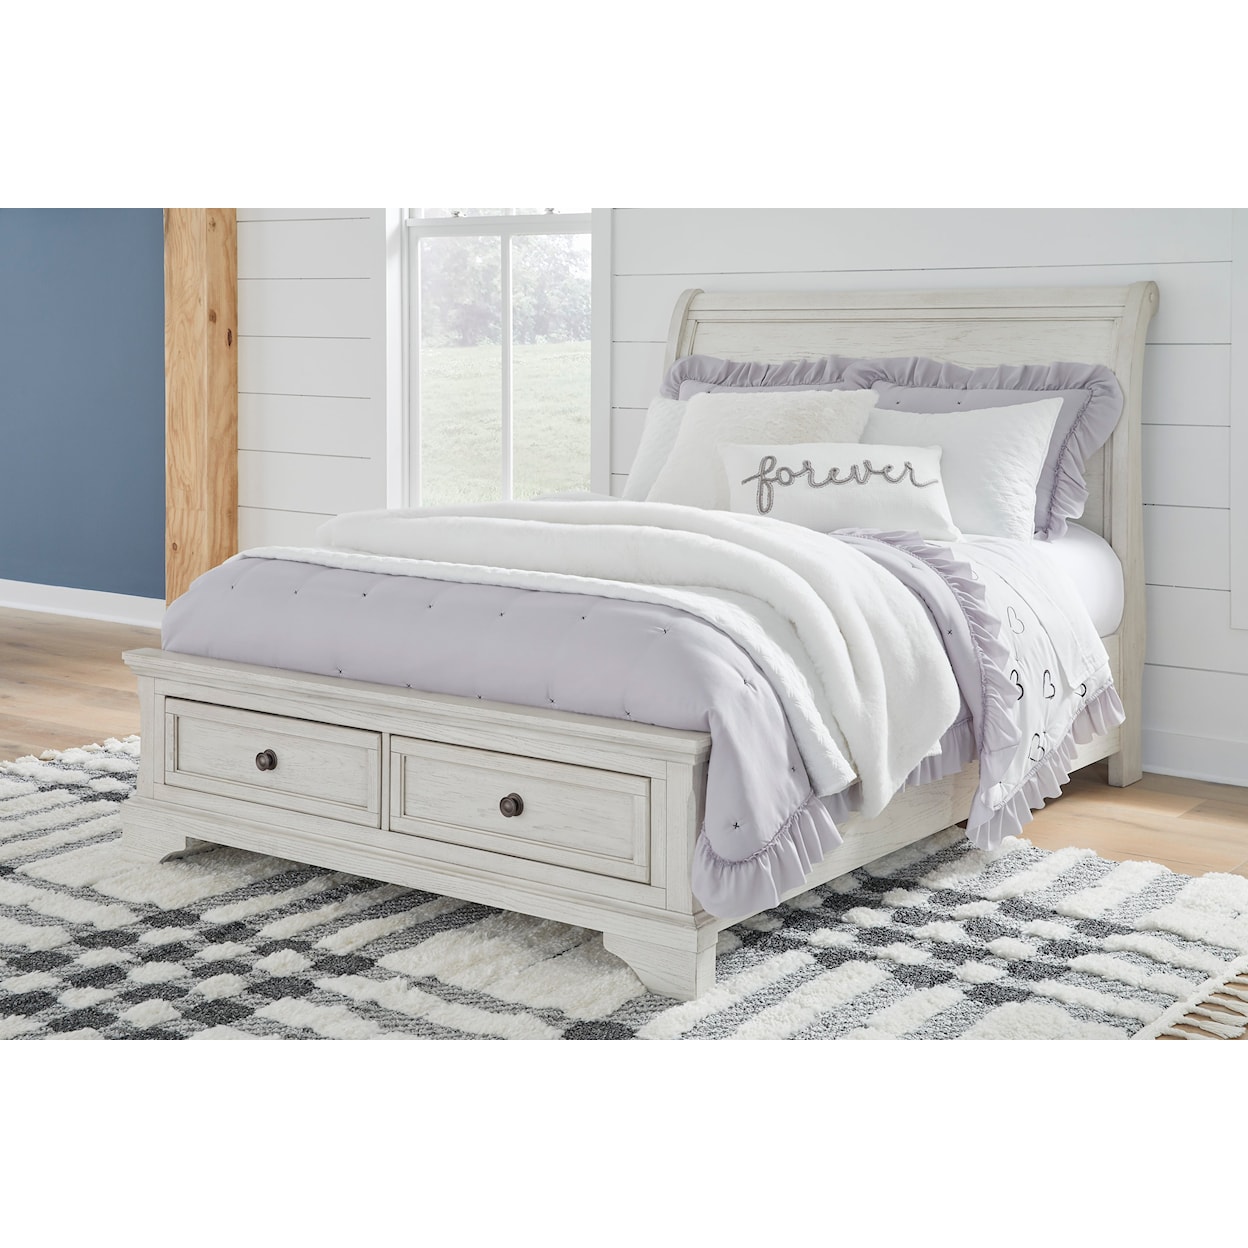 Ashley Furniture Signature Design Robbinsdale Full Sleigh Bed with Storage